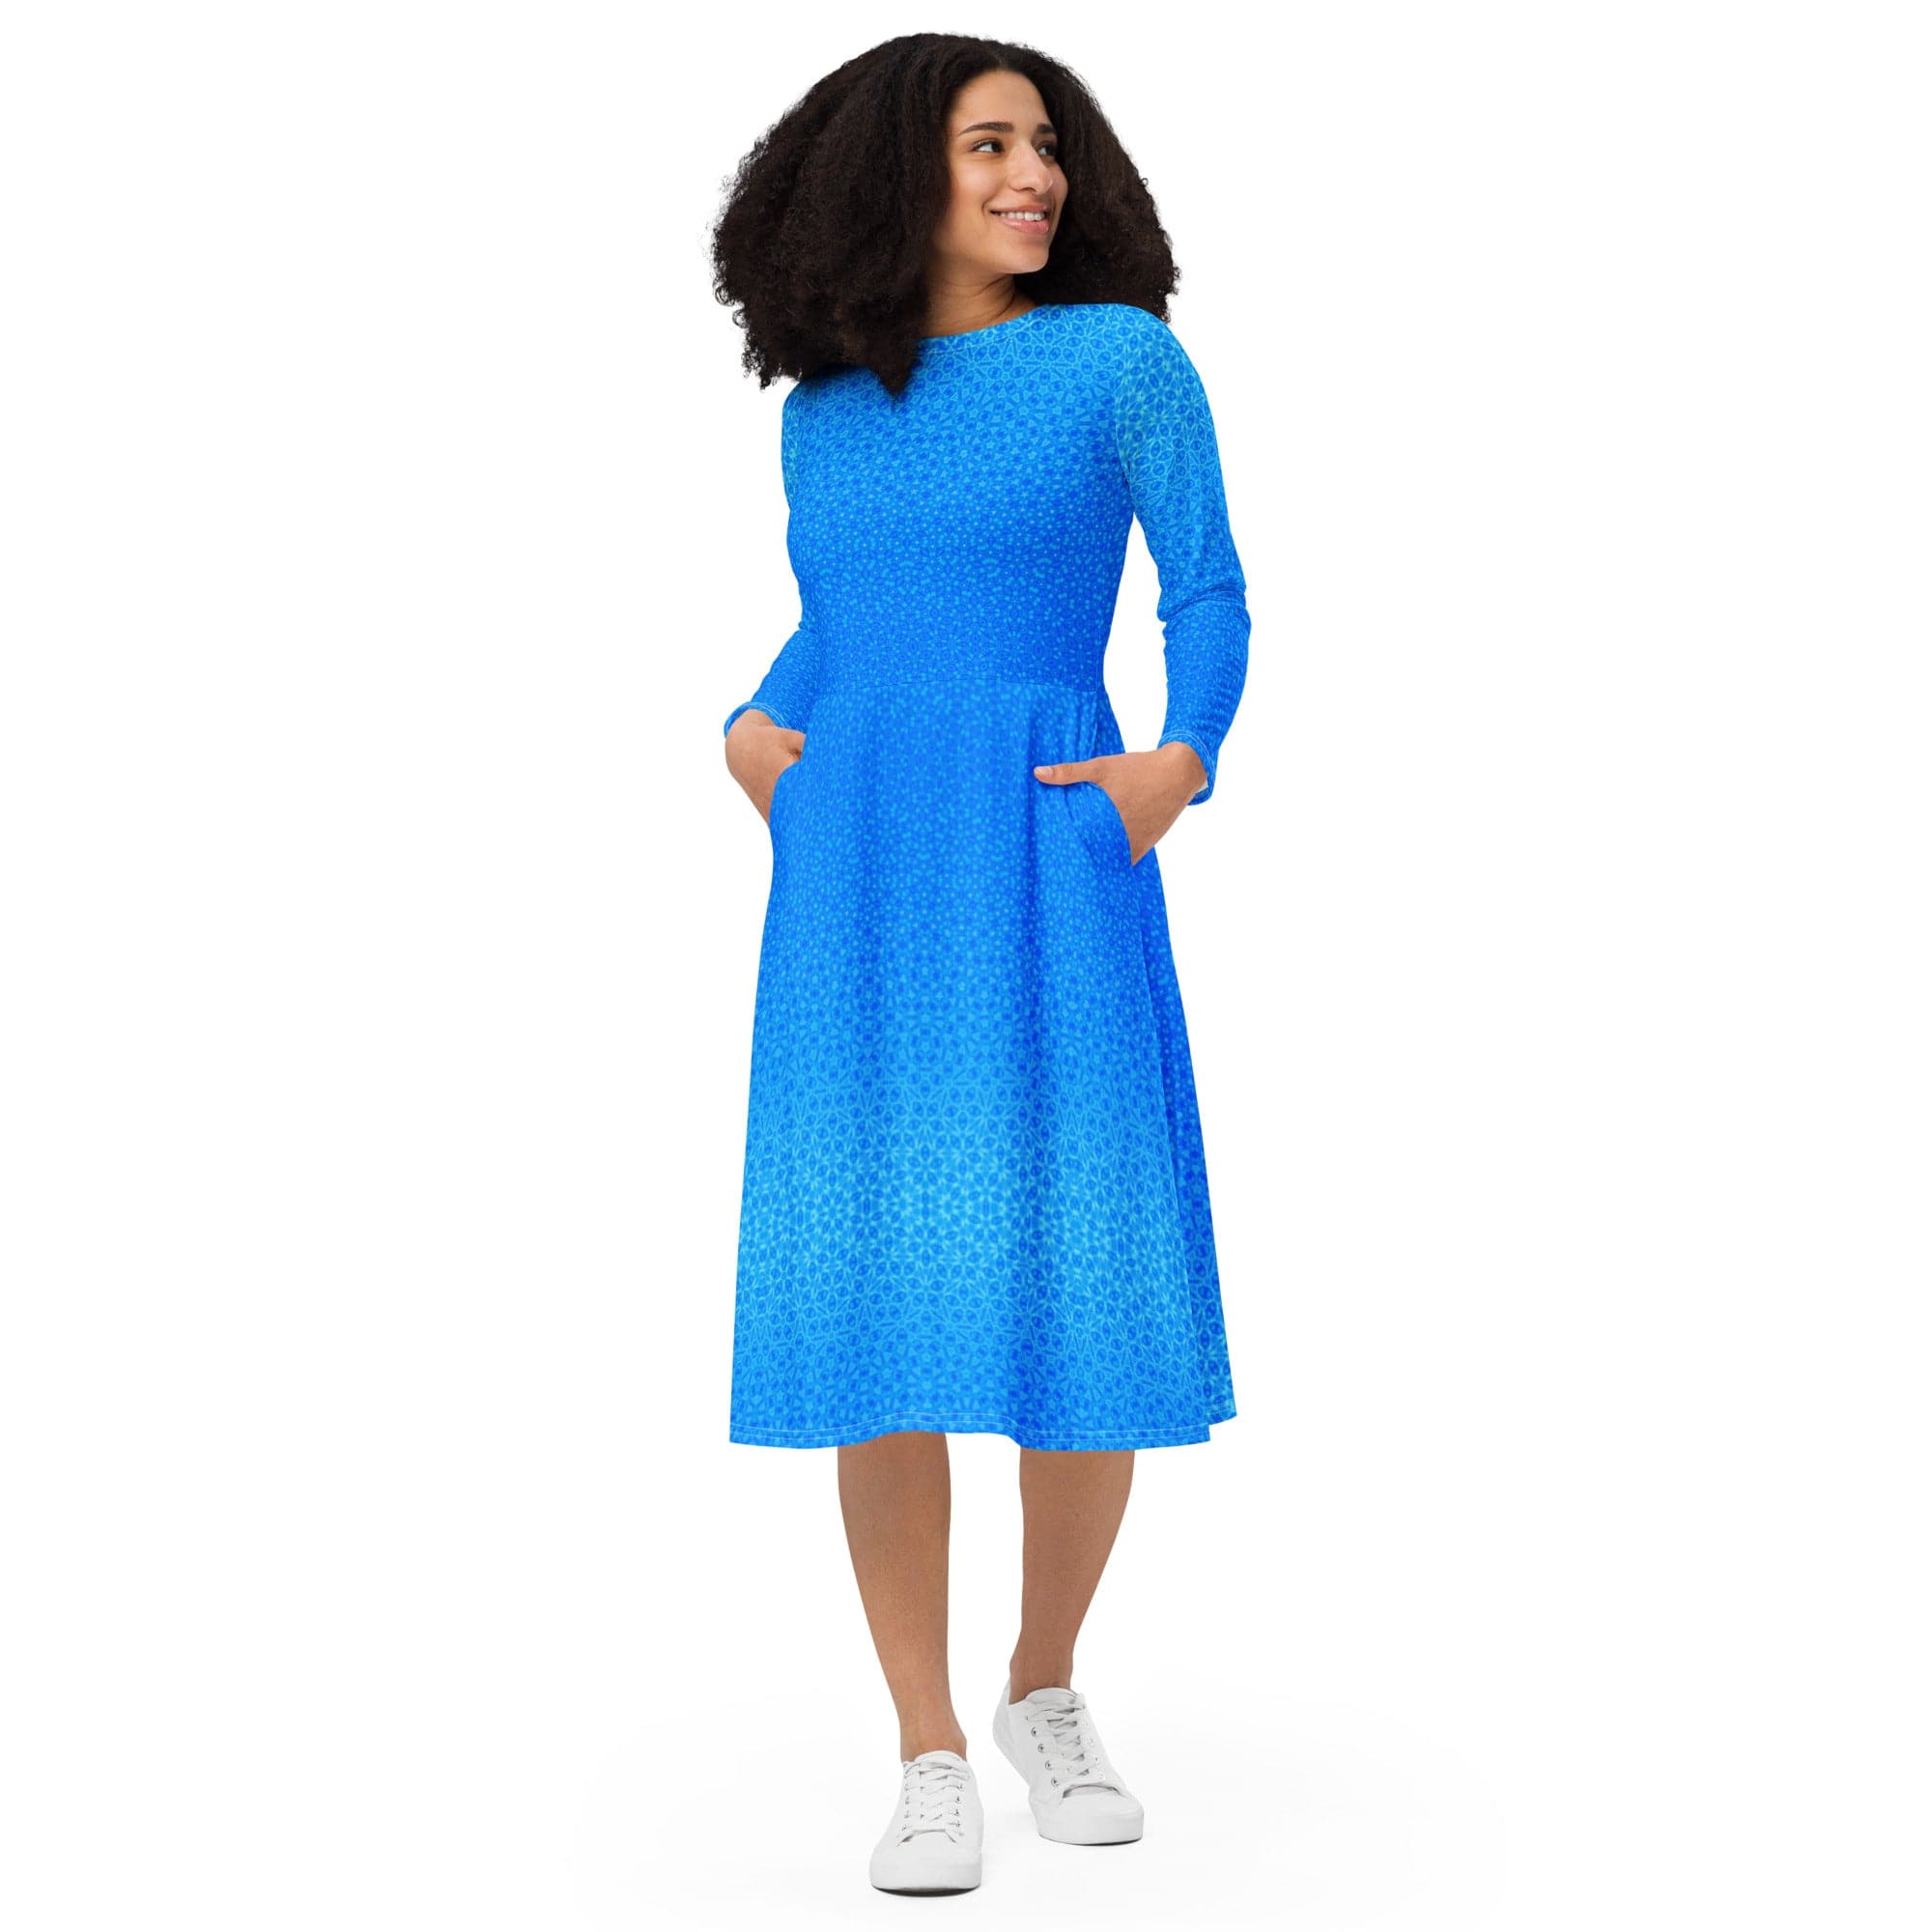 Heavenly Blue Rosy patterned narrow fitted long sleeve midi dress, by Sensus Studio Design